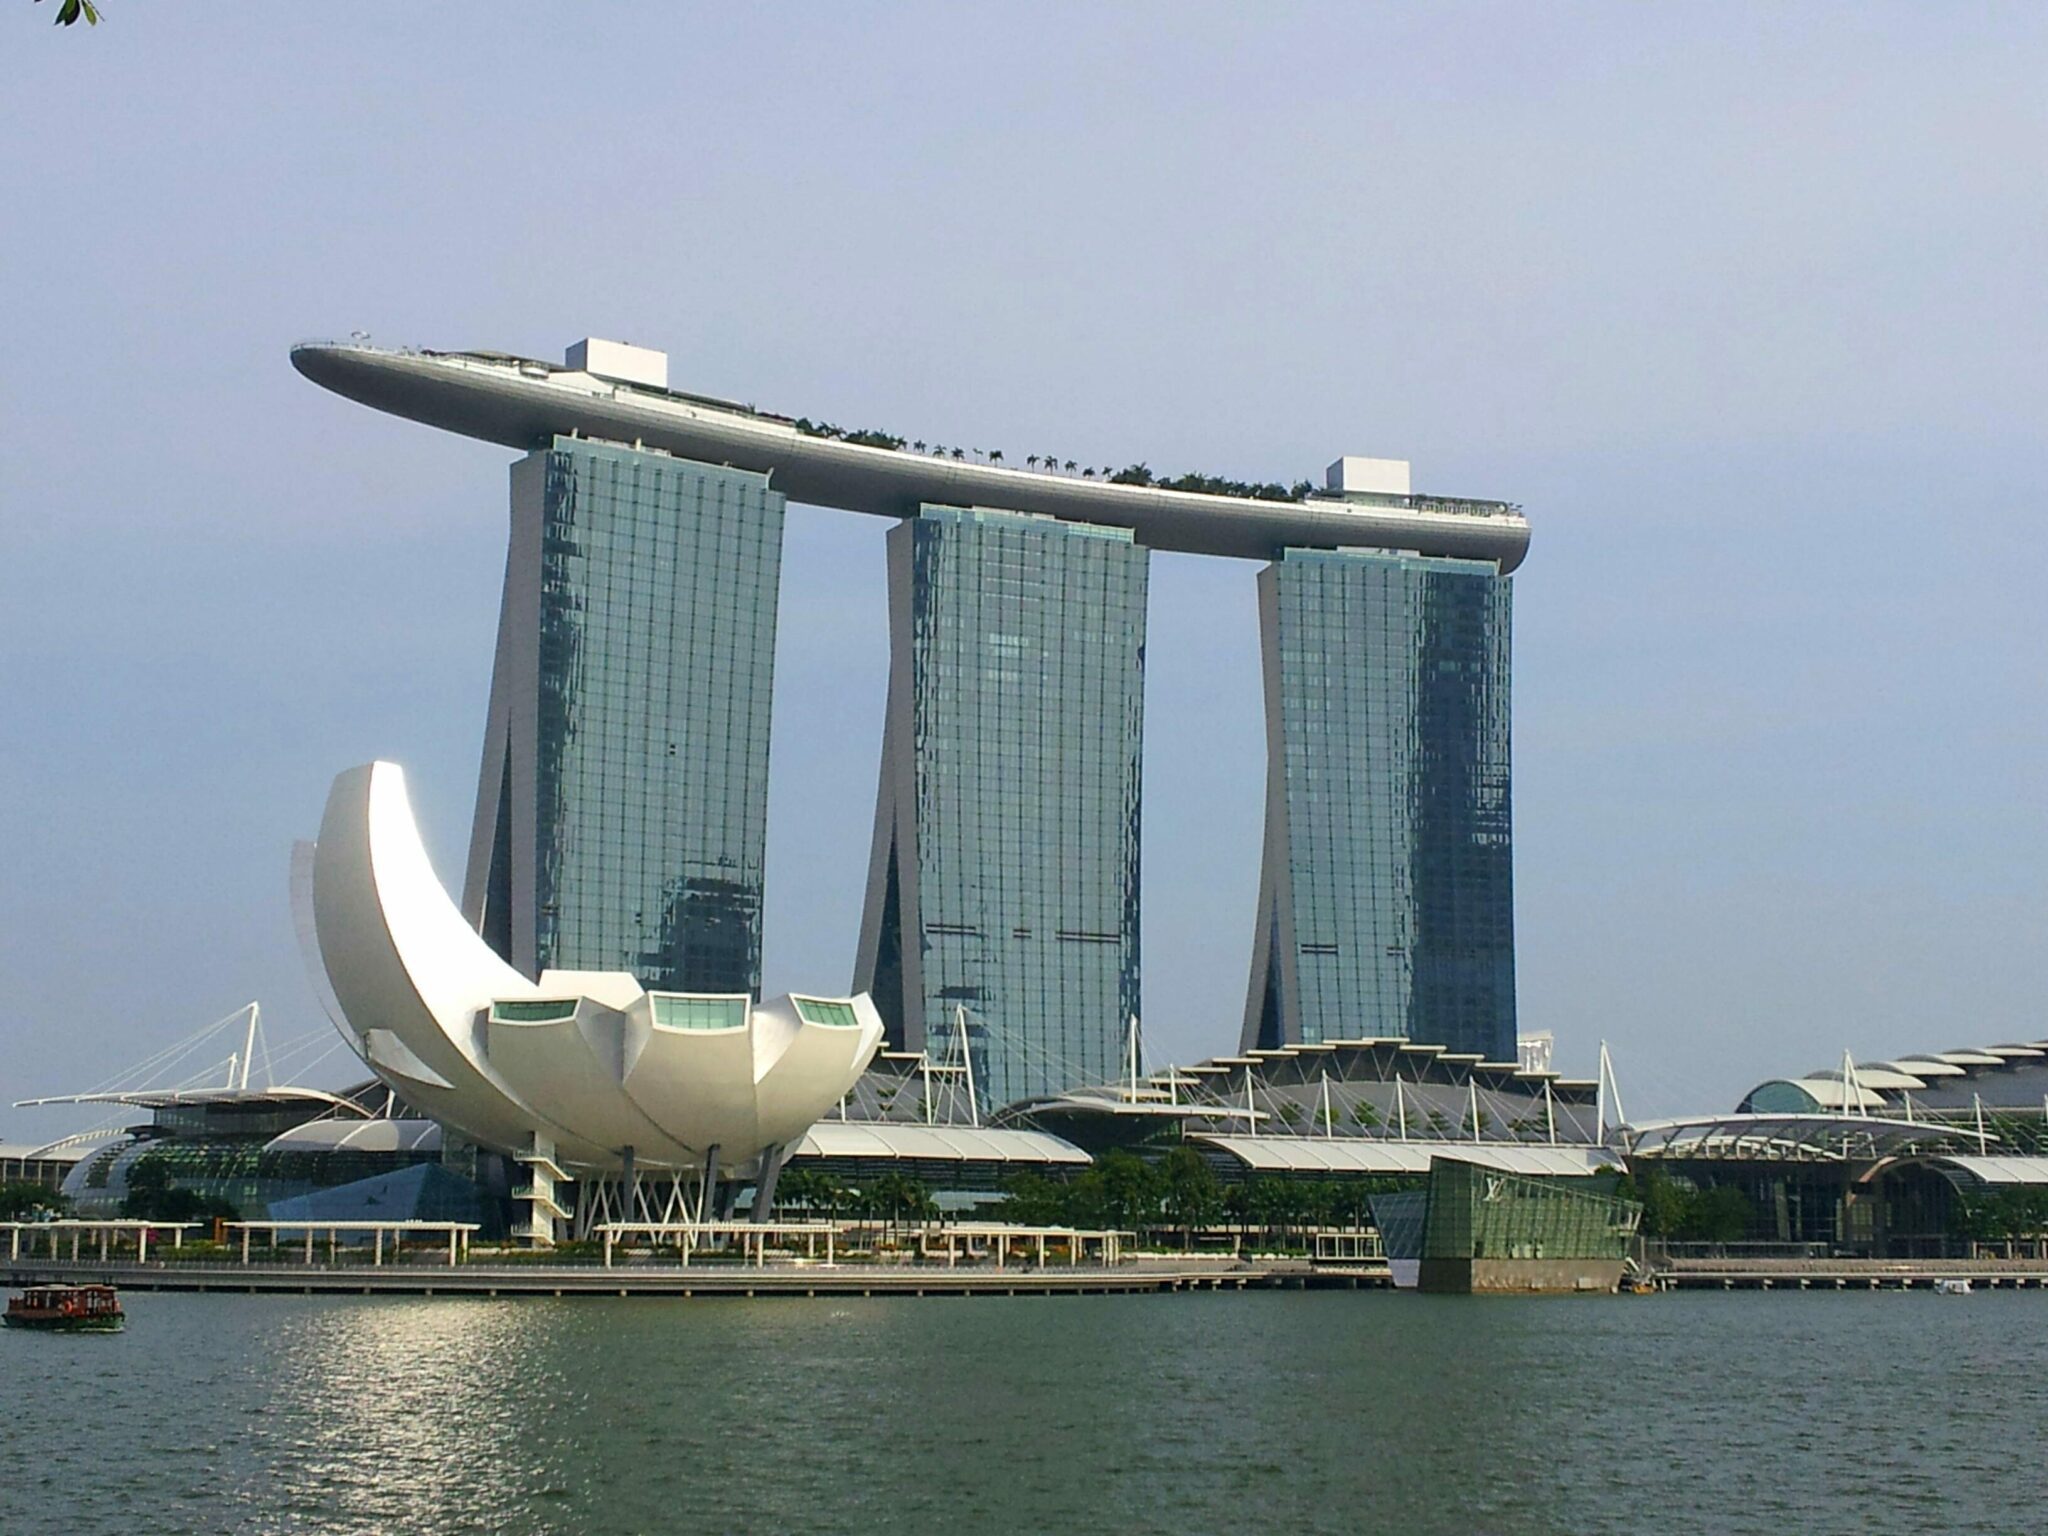 Singapore: 21 tips for an affordable visit